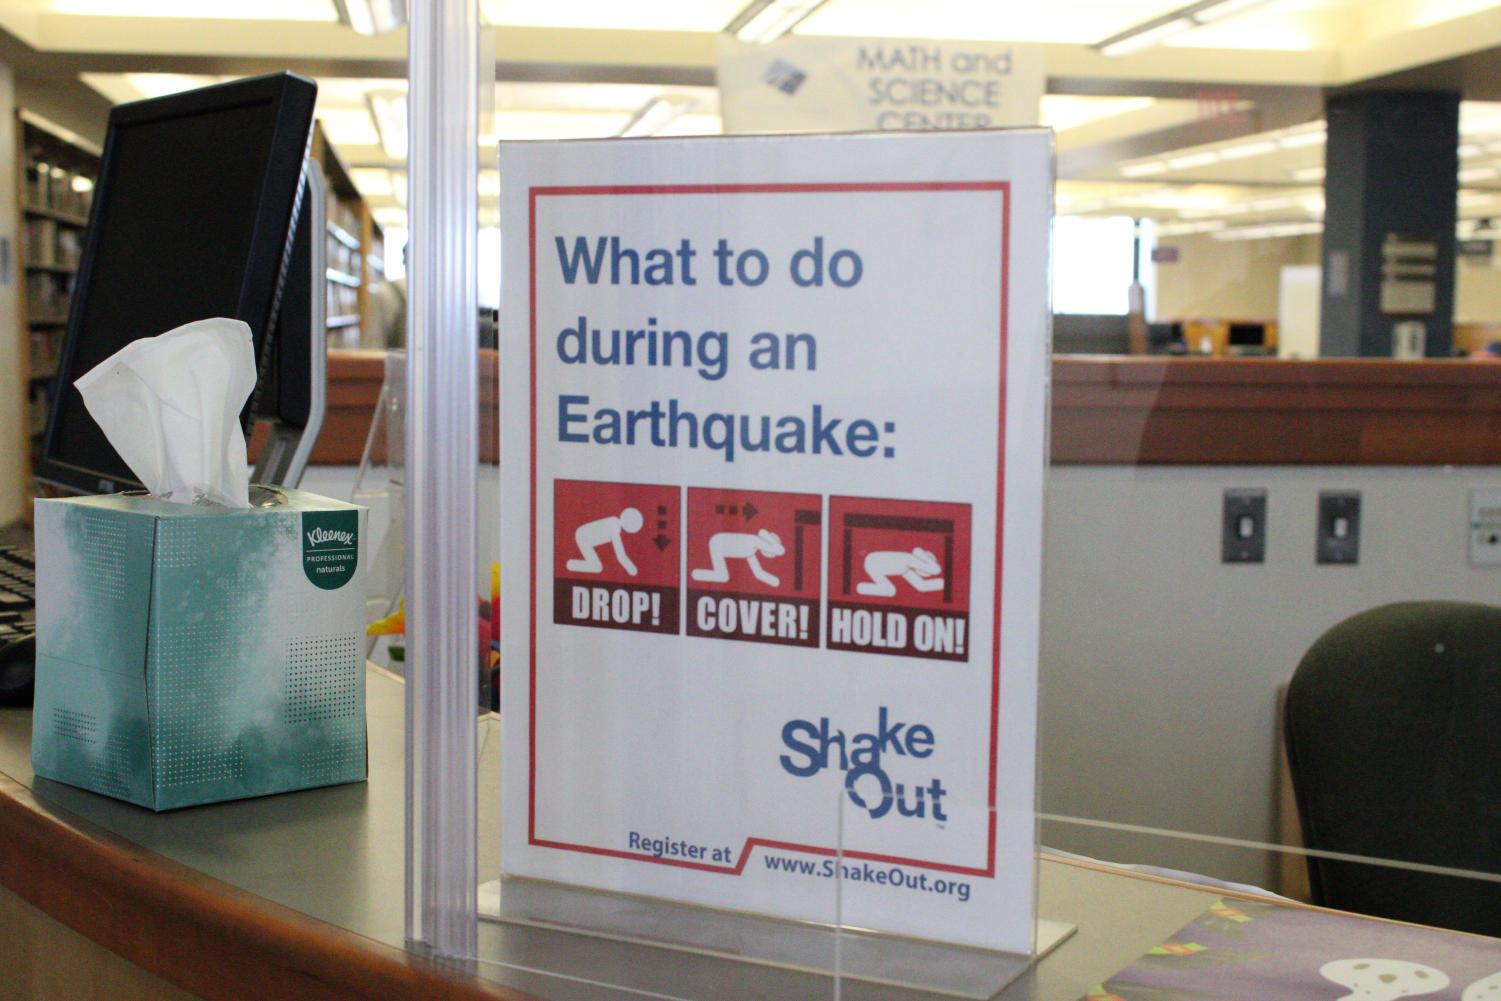 An informational sign sits atop a desk in the Math and Science Center in the Moorpark College Library. It explains the well known "drop, cover, and hold on" instructions to follow during the event of an earthquake.